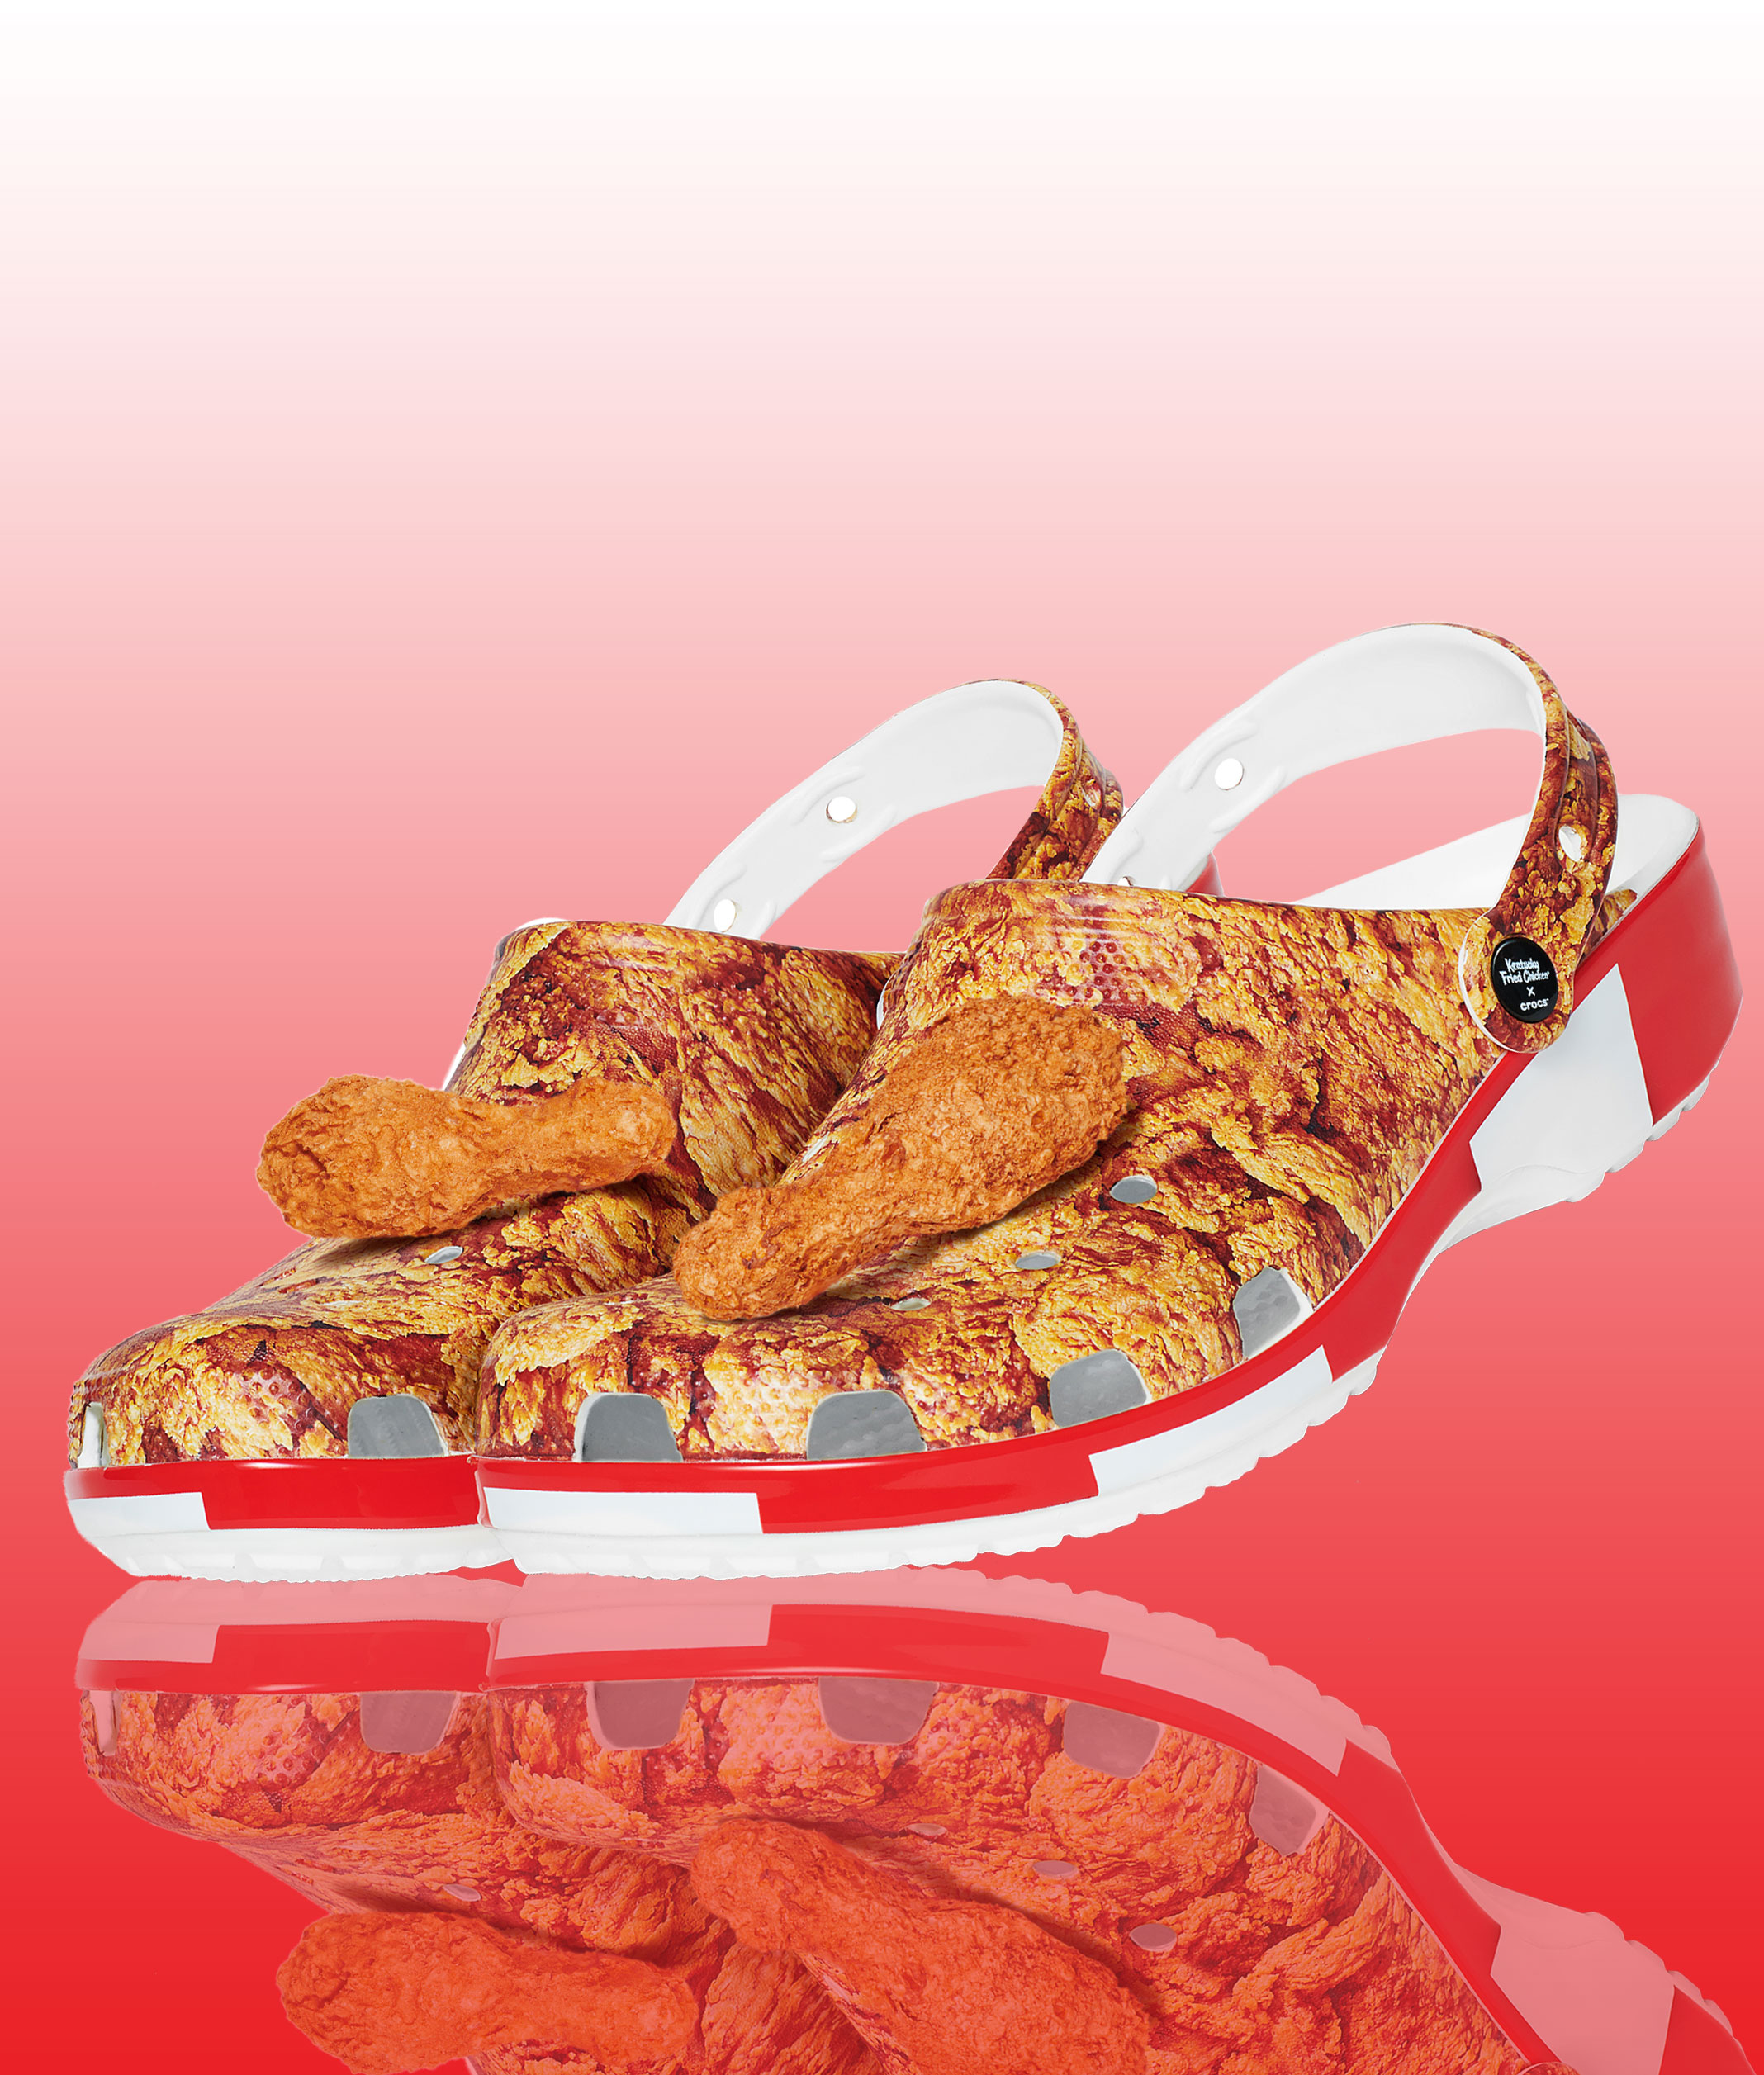 Crocs Partners With KFC for Limited-Edition Collaboration